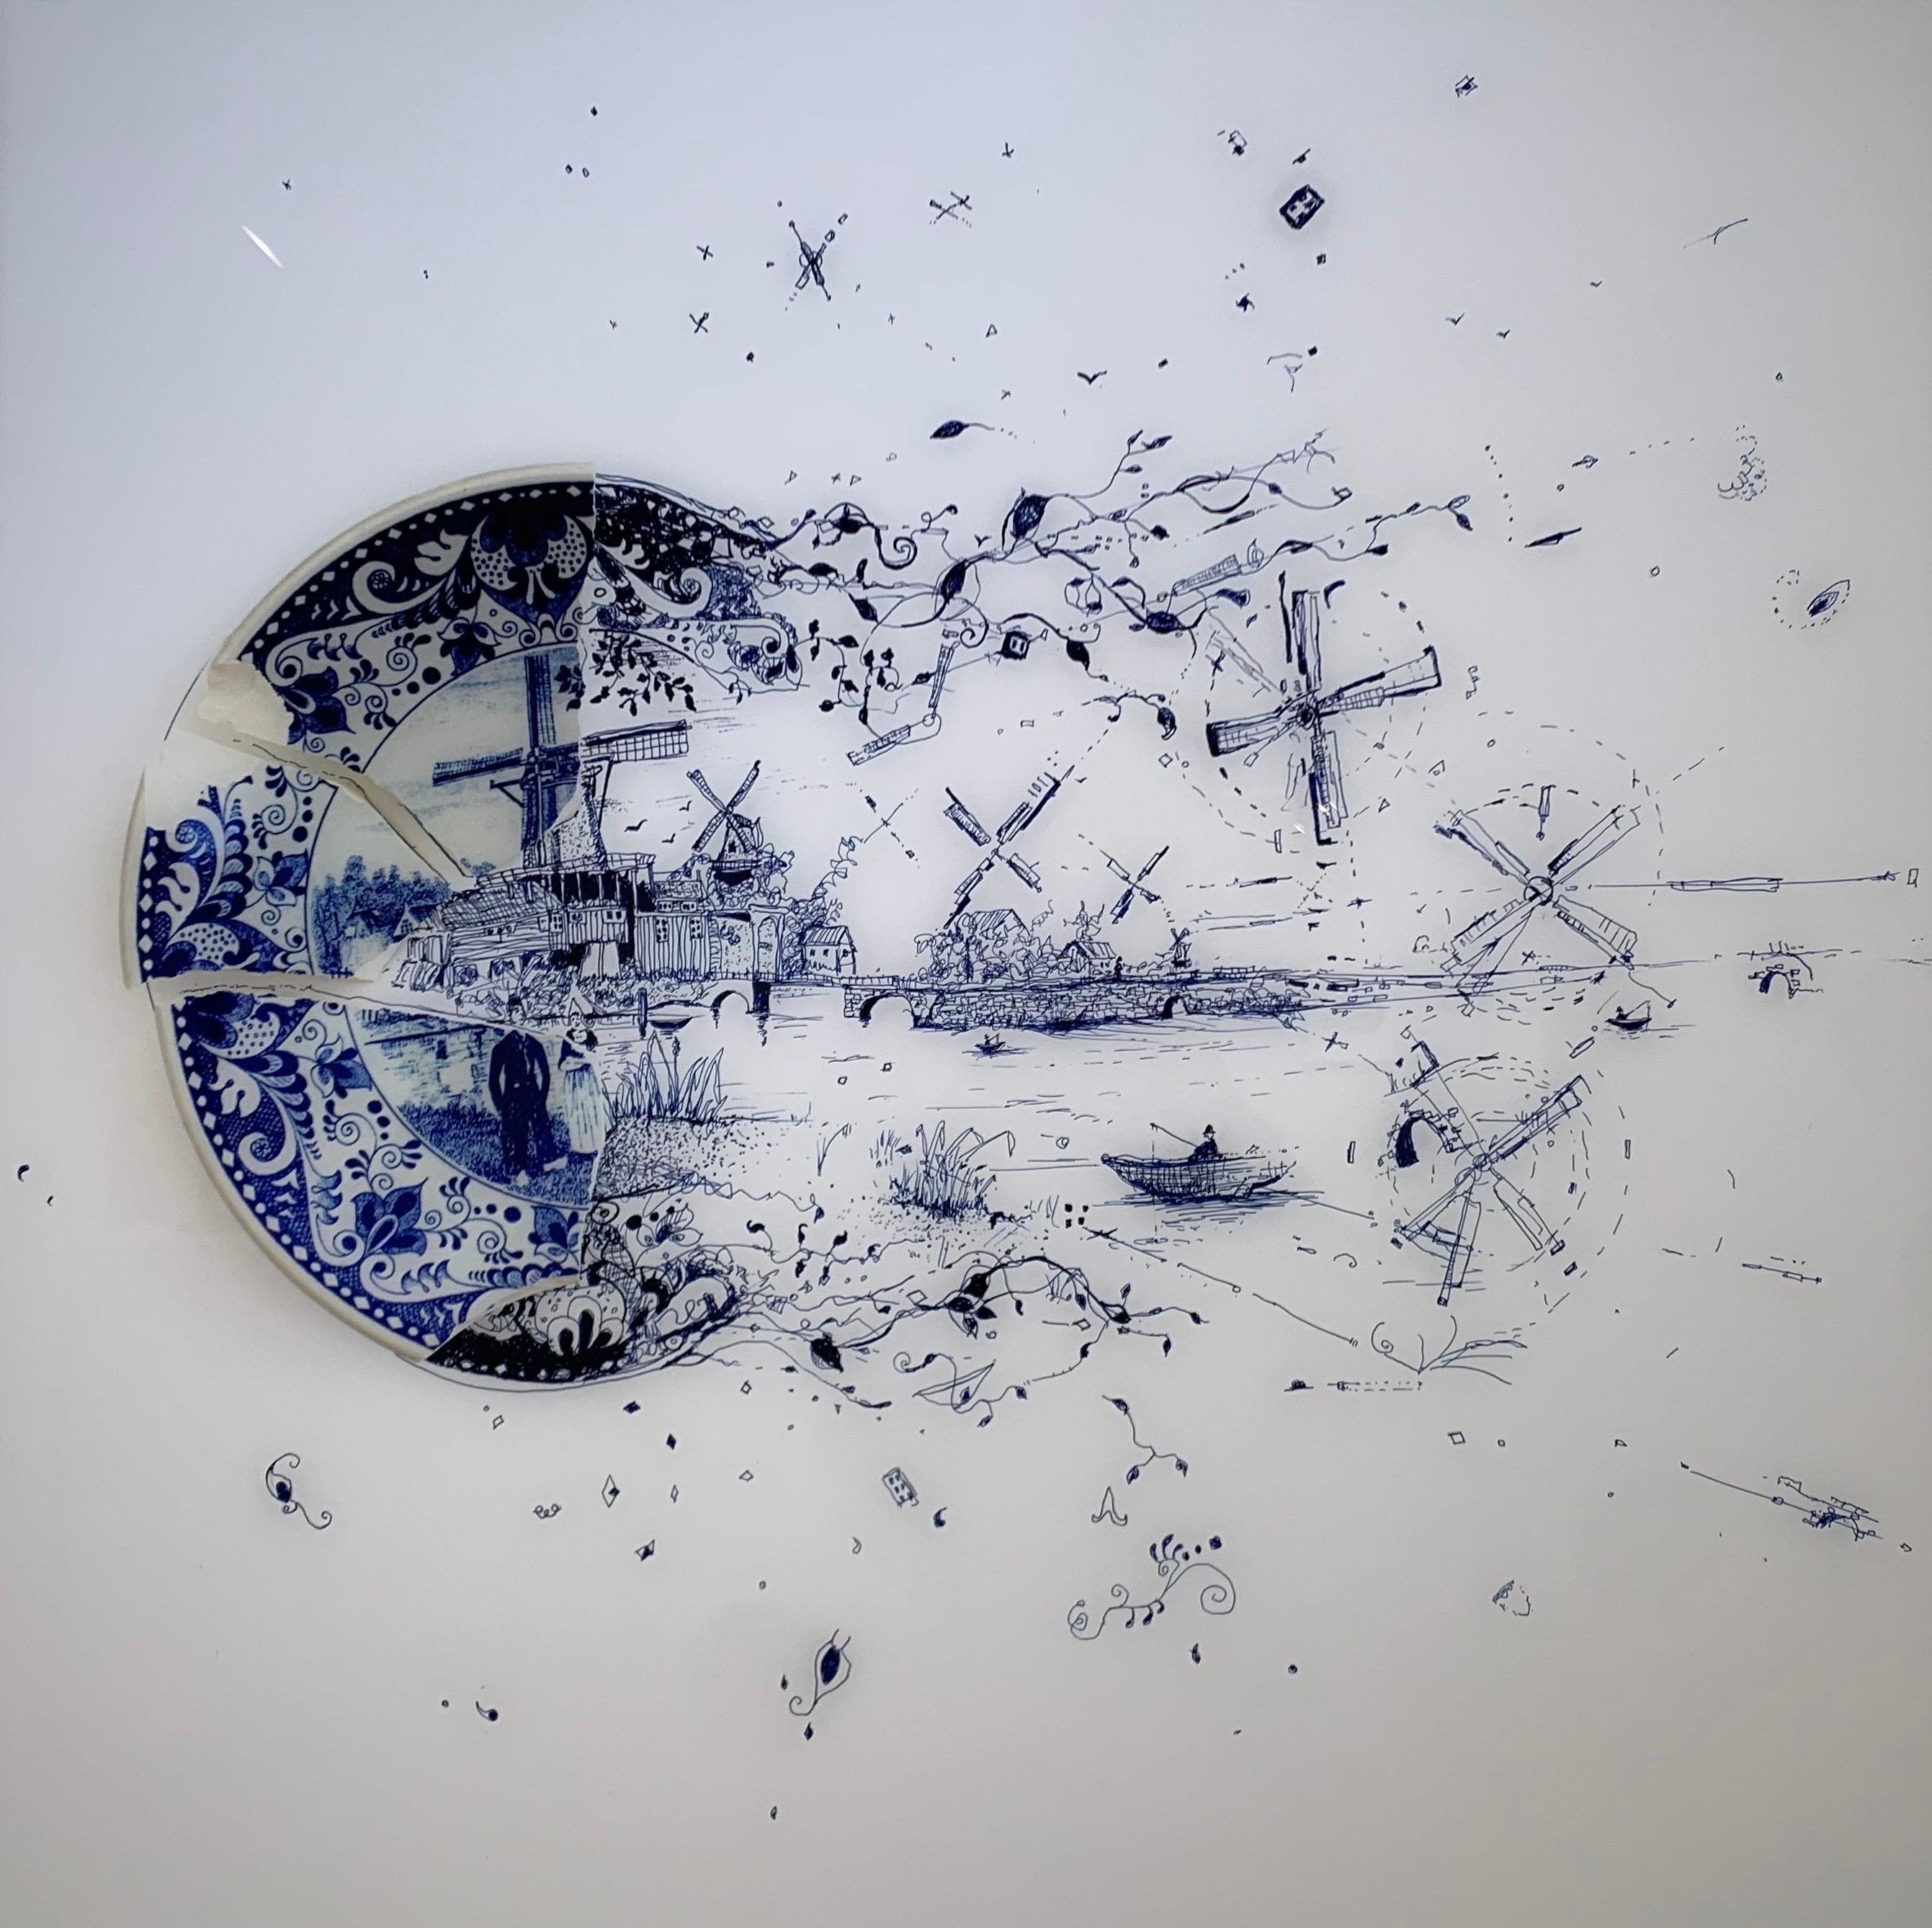 Prints on plexiglass - Fragmented in Blue with Windmills and Sailboat